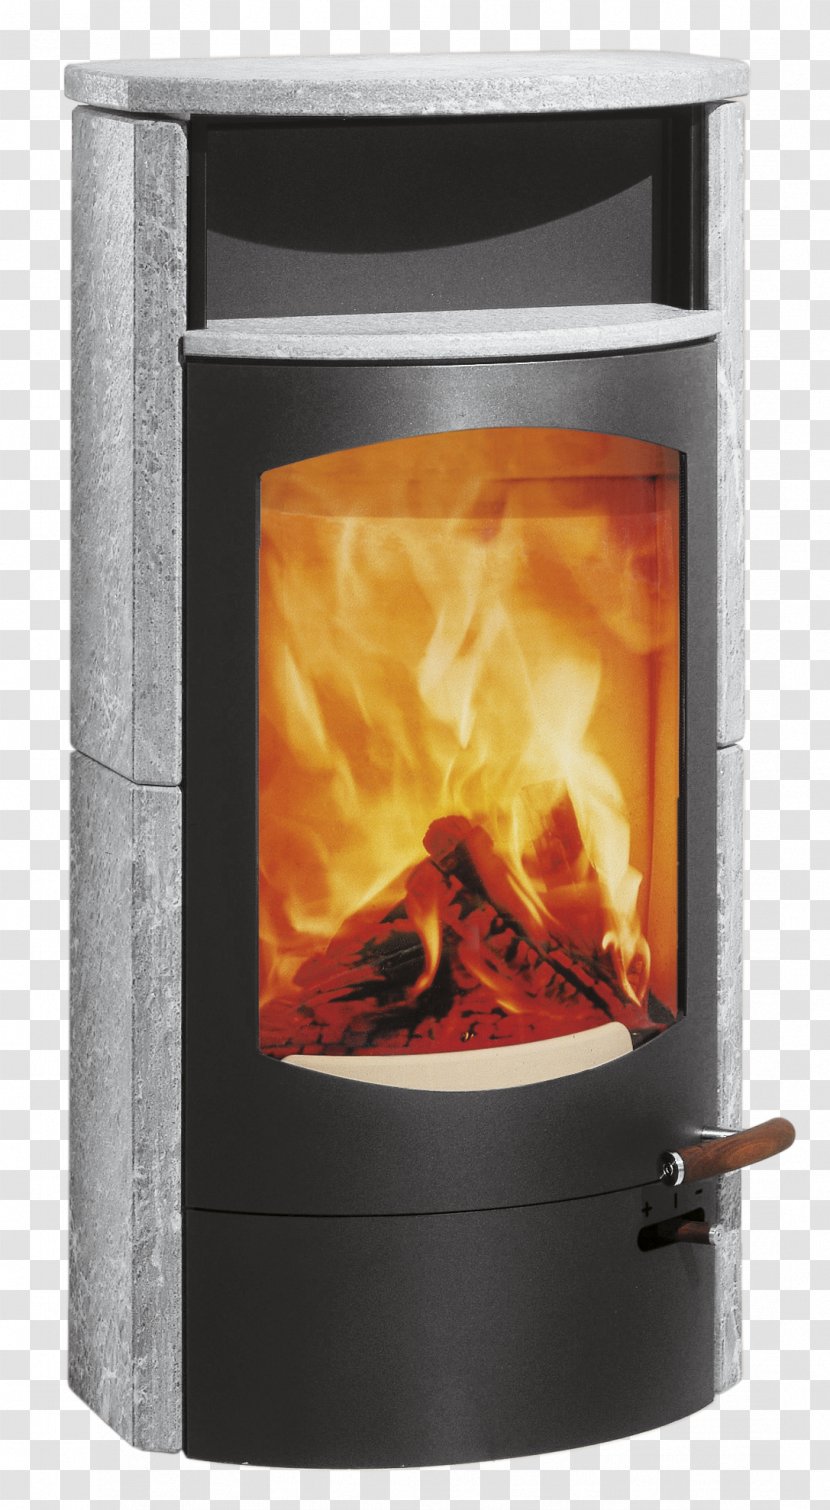 Wood Stoves Fireplace Kaminofen Kamin24 - Specksteinofen - Stove Transparent PNG